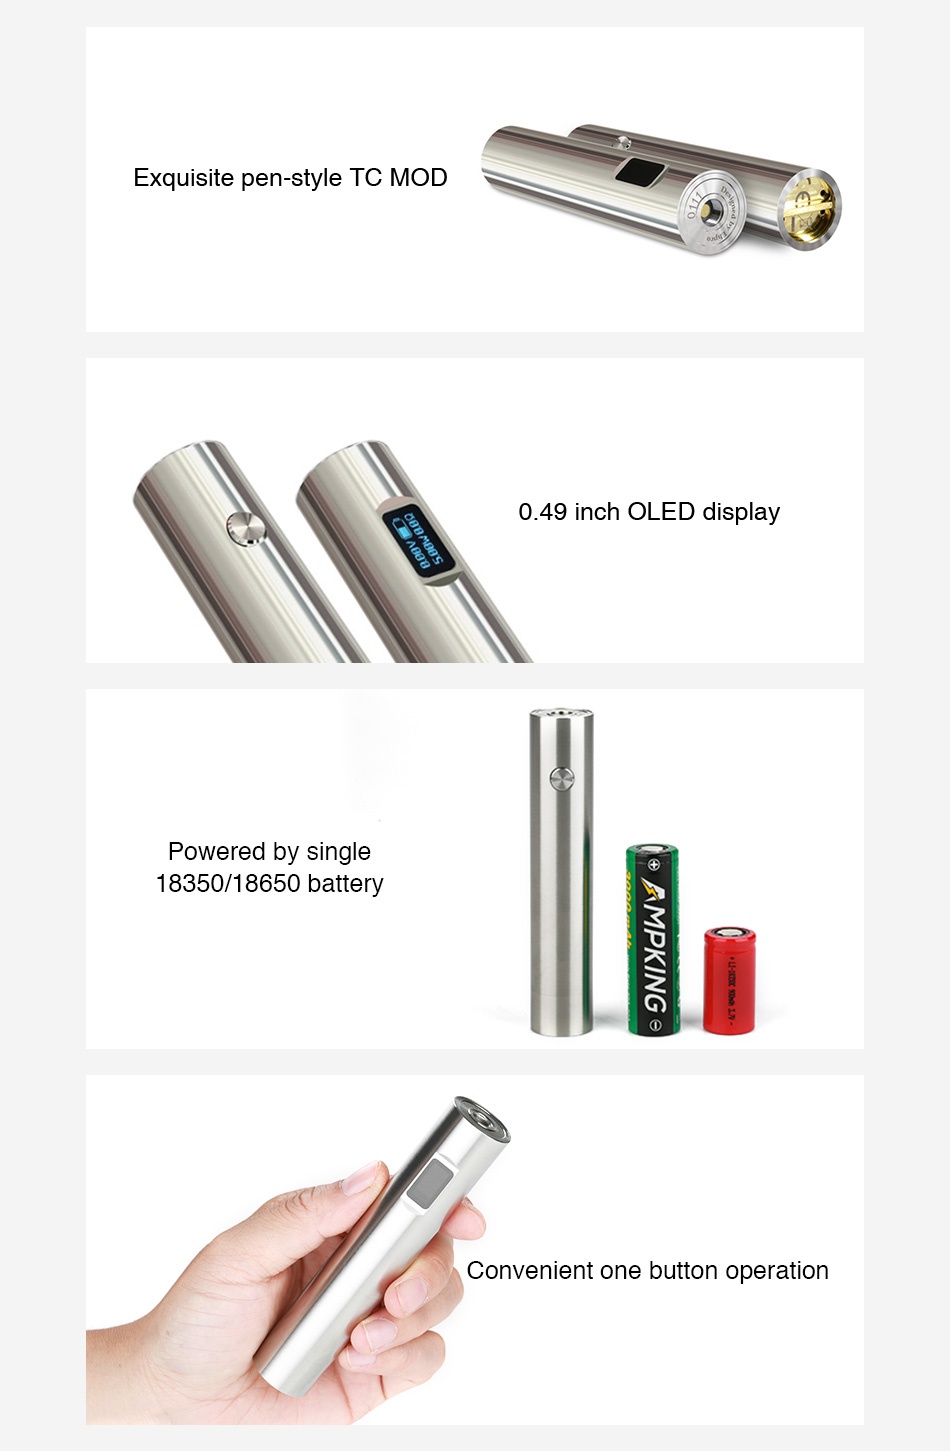 Ehpro 101 50W TC MOD Exquisite pen style TC MOD 0 49 inch OLEd display Powered by single 18350 18650 battery Convenient one button operation